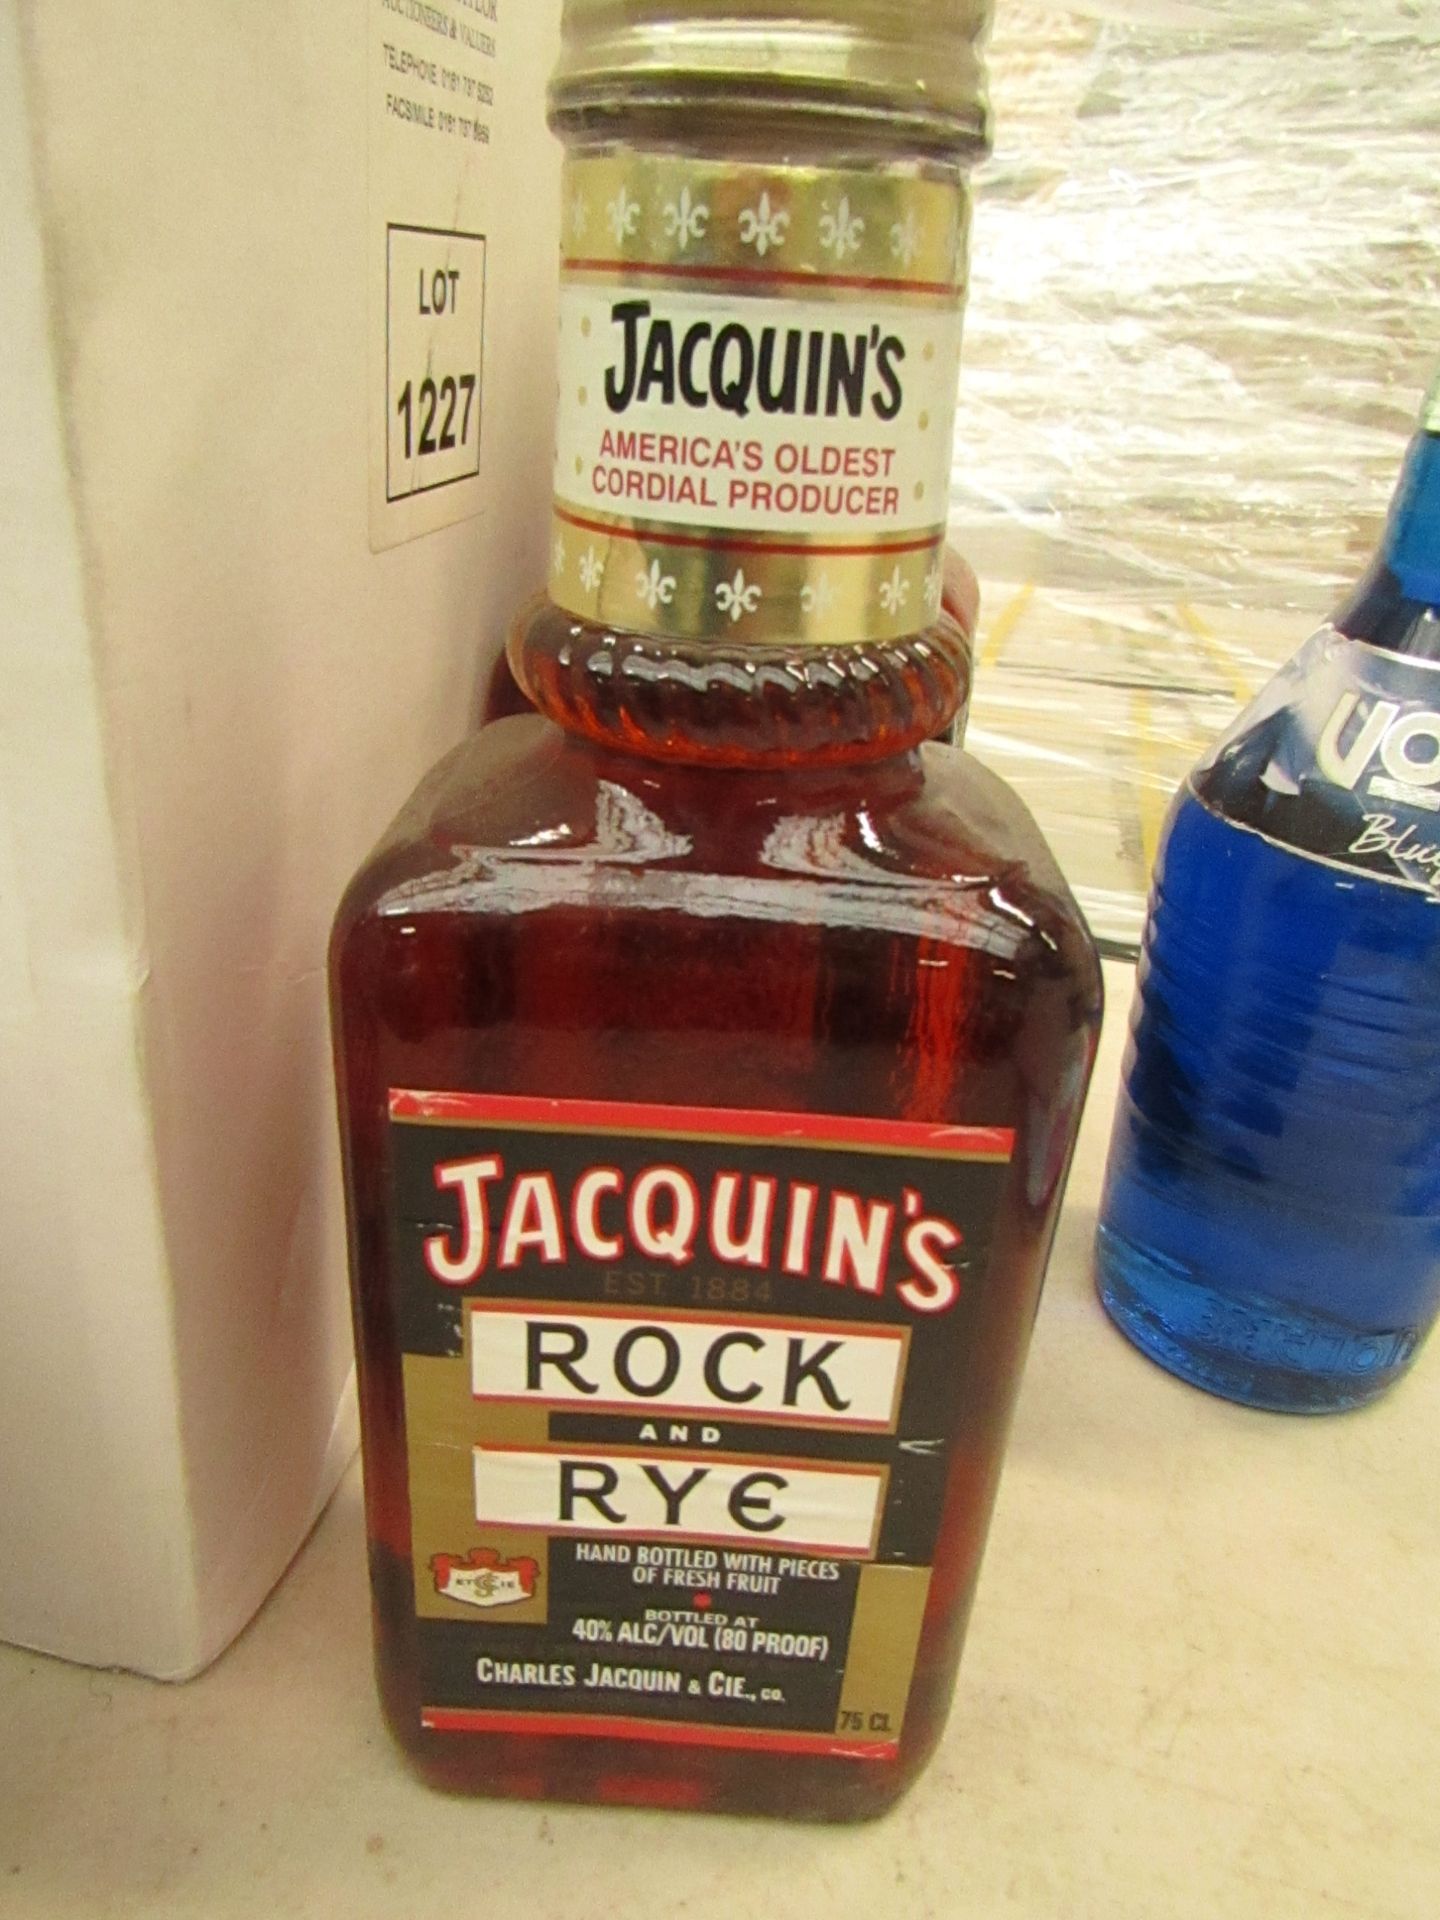 Jacquins Rock & Rye. Hand Bottled with Pieces of Fresh Fruit. 40% vol. 70cl. Bottle is market but